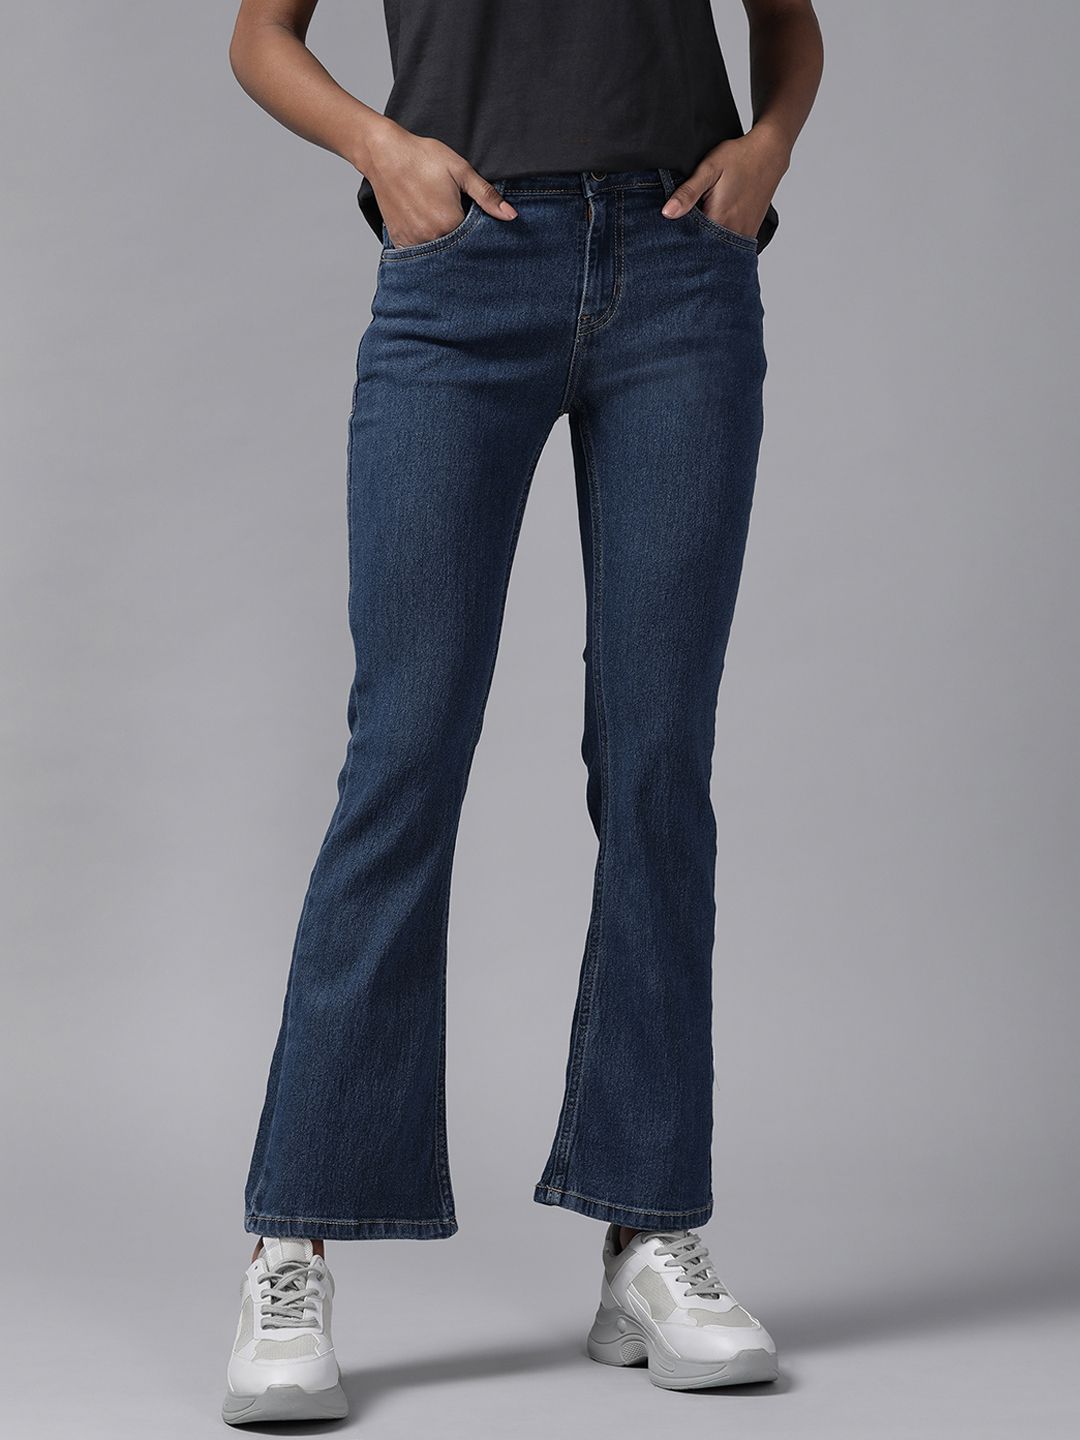 The Roadster Lifestyle Co Women Navy Blue Flared Stretchable Jeans Price in India